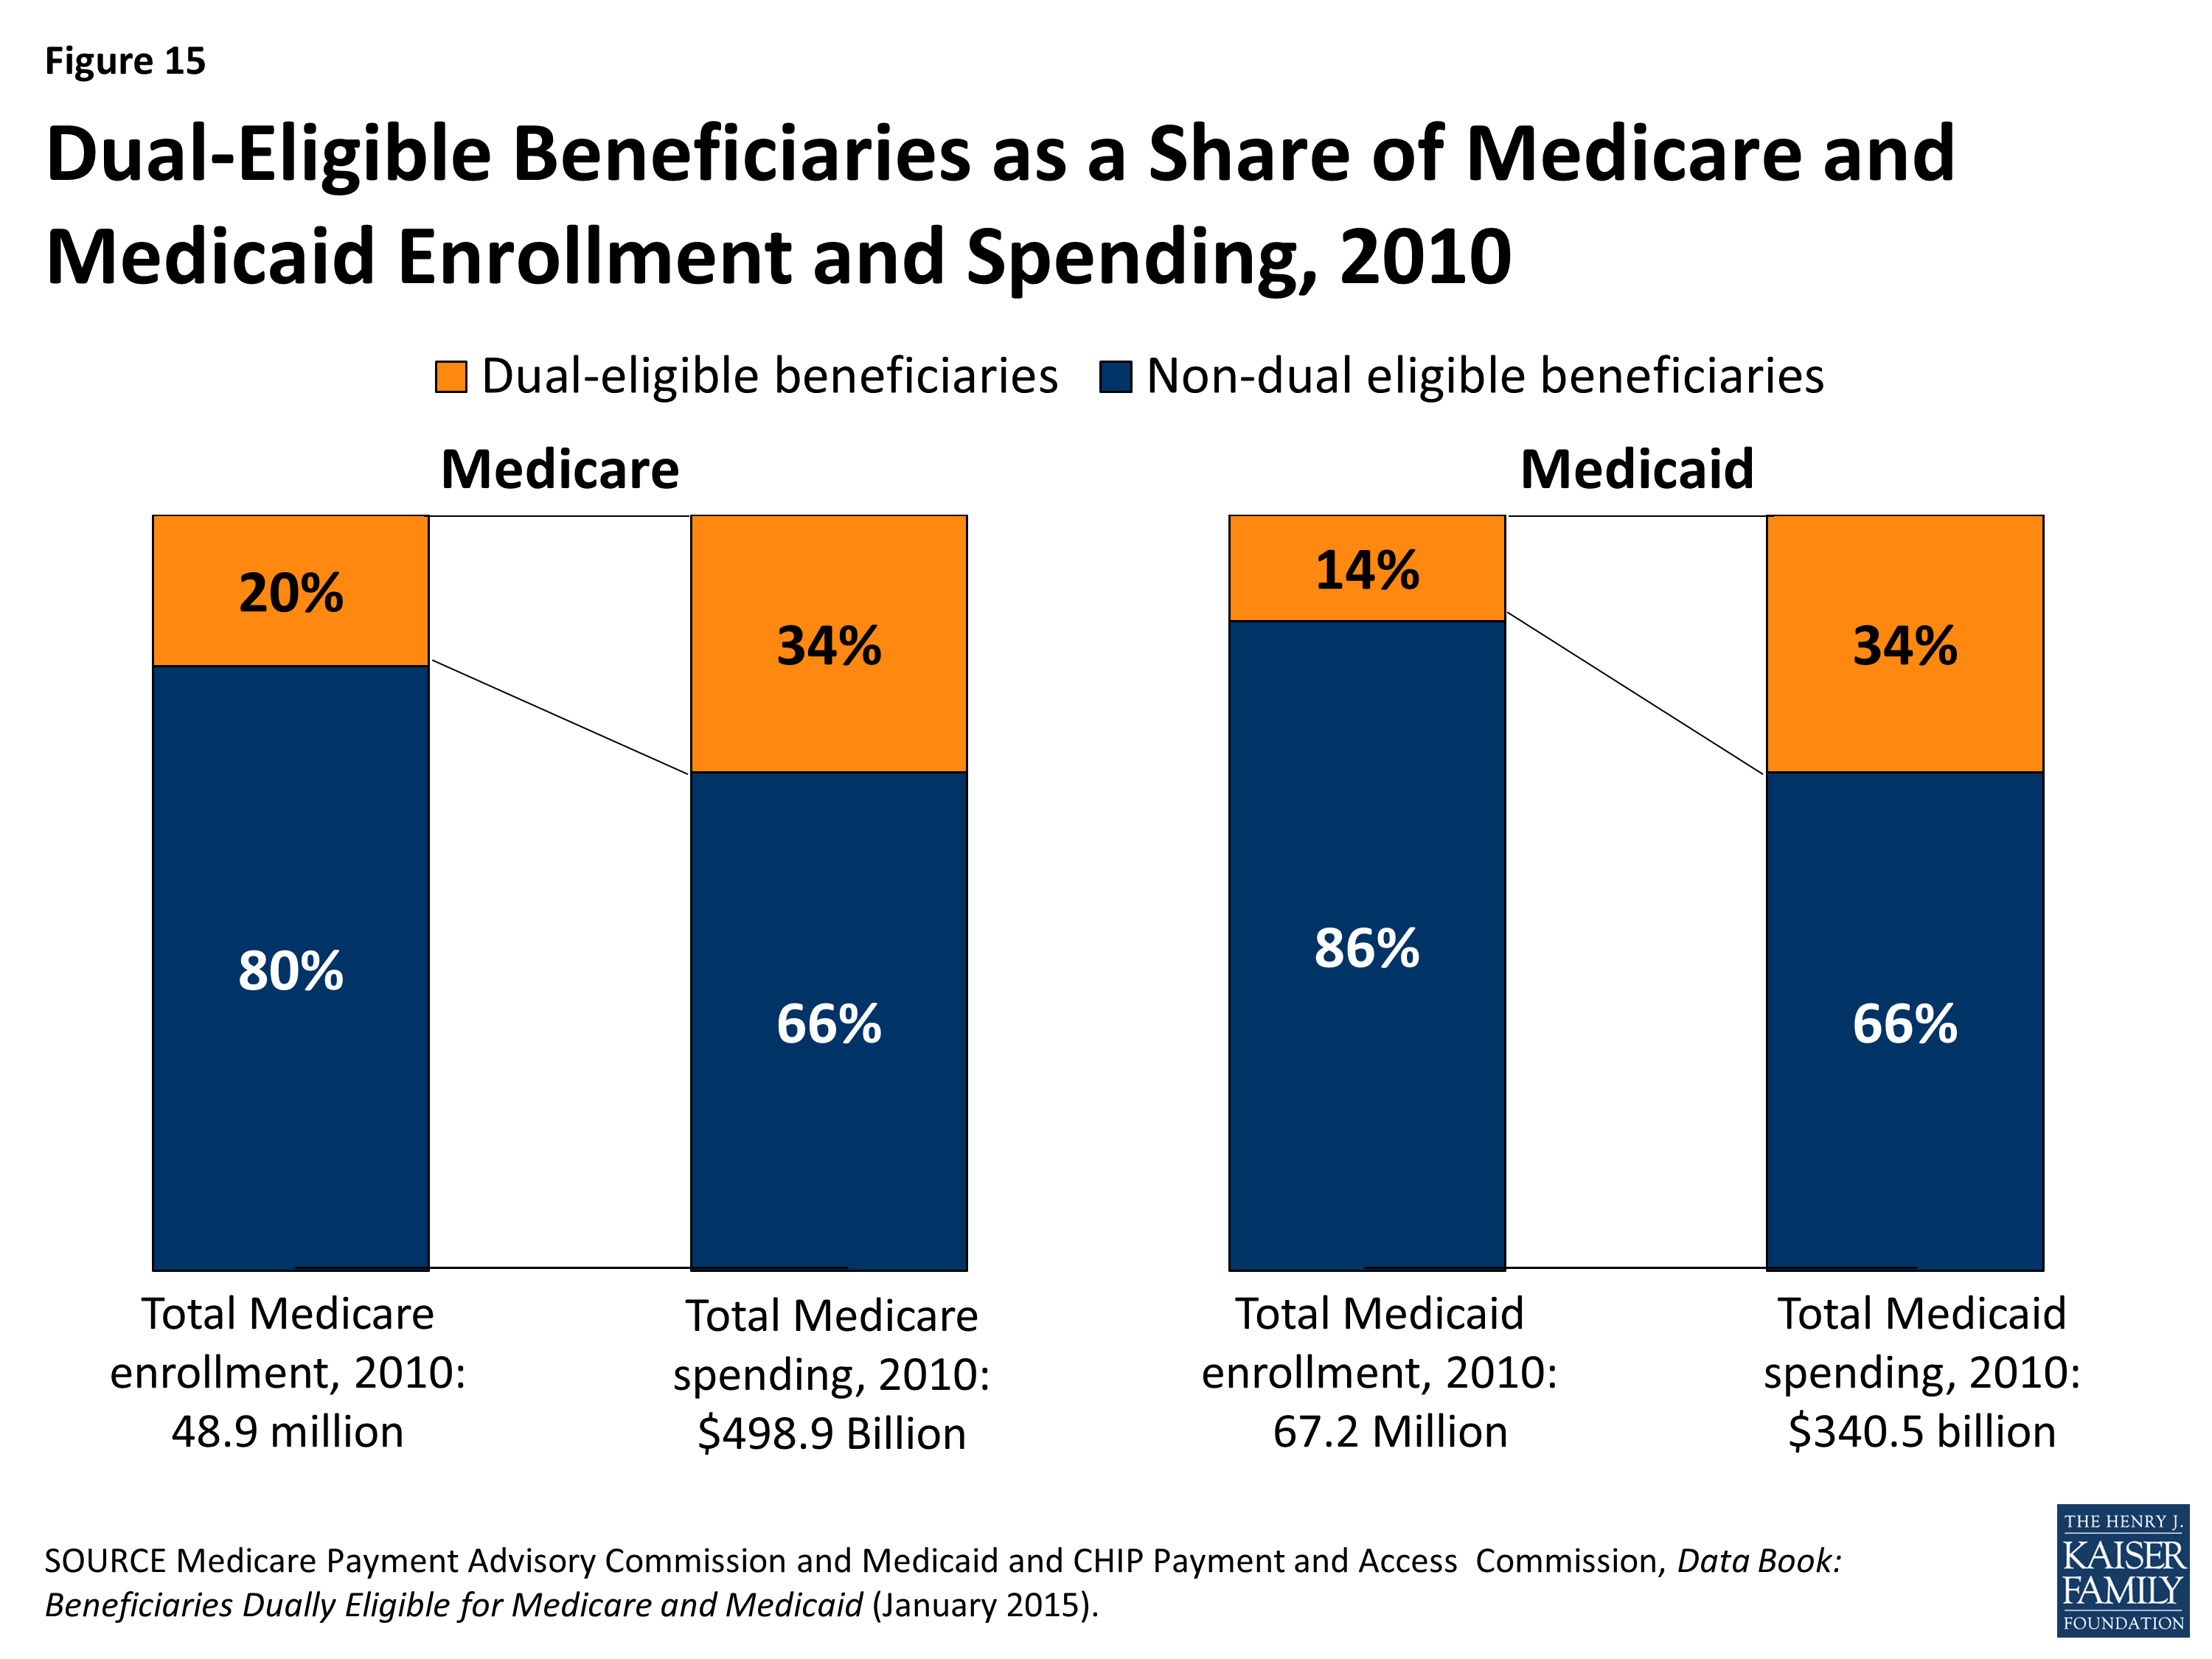 a-primer-on-medicare-what-is-the-role-of-medicare-for-dual-eligible